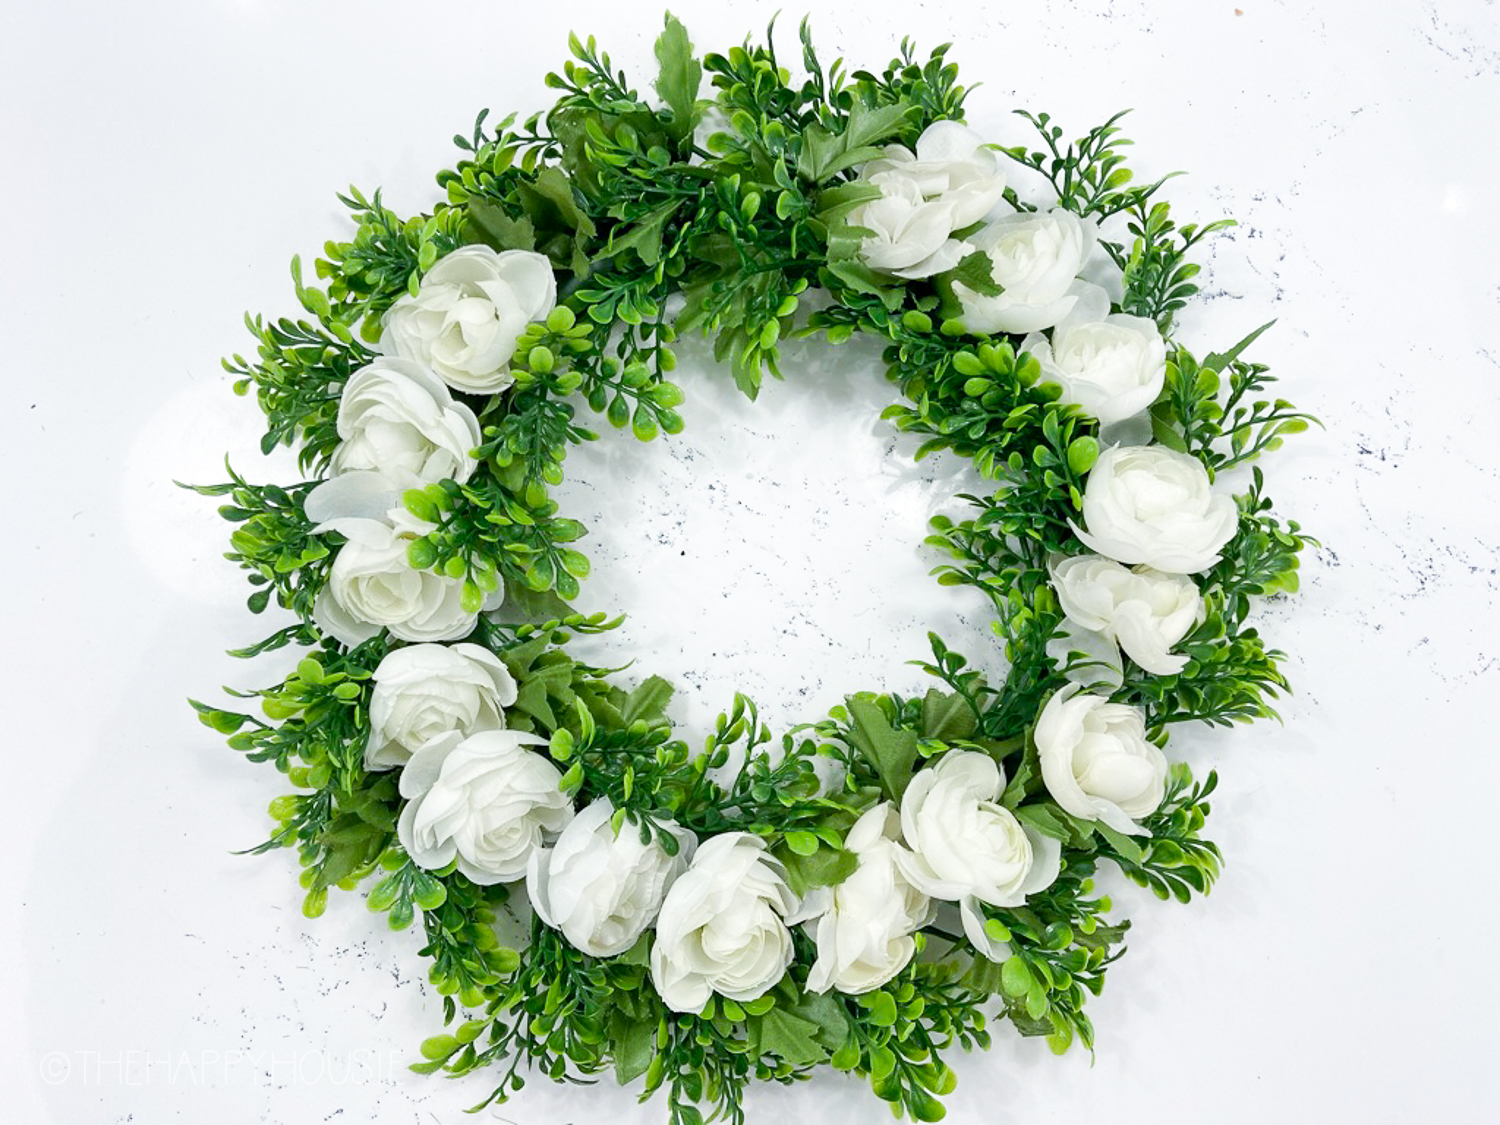 The white flowers all around the green wreath.